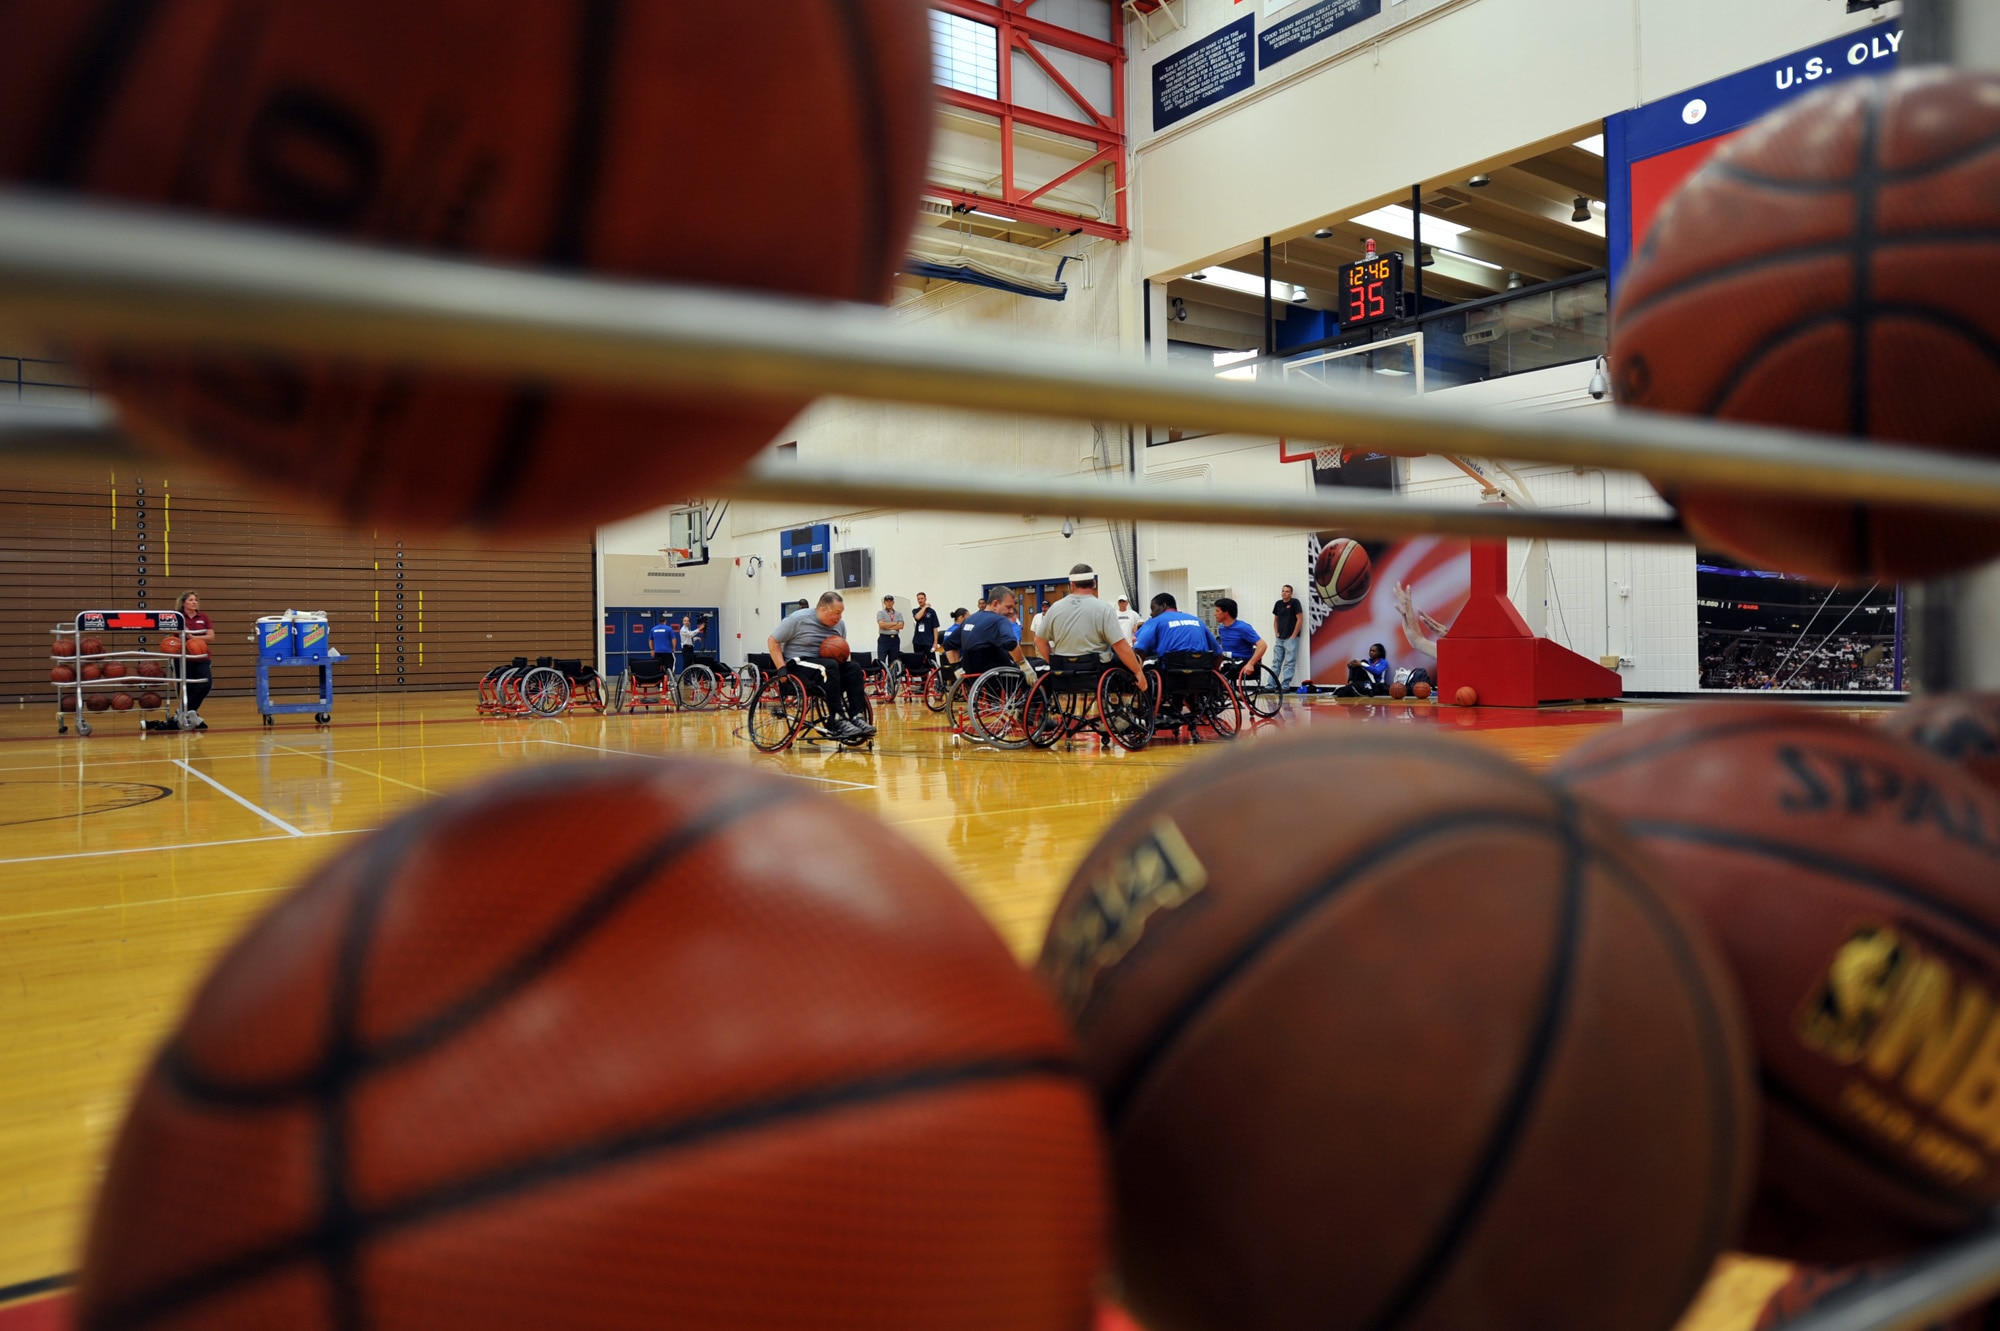 Staff Sgt. Richard Pollock II practices basketball May 10, 2010, at the Olympic Training Center in Colorado Springs, Colo., prior to the start of the inaugural Warrior Games.  Sergeant Pollock is a member of the Air Force's wheelchair basketball team. Teams from the Air Force, Army, Navy, Marines and Coast Guard are participating in the Warrior Games which begin May 10 and finish May 14.  (U.S. Air Force photo/Staff Sgt. Desiree N. Palacios)